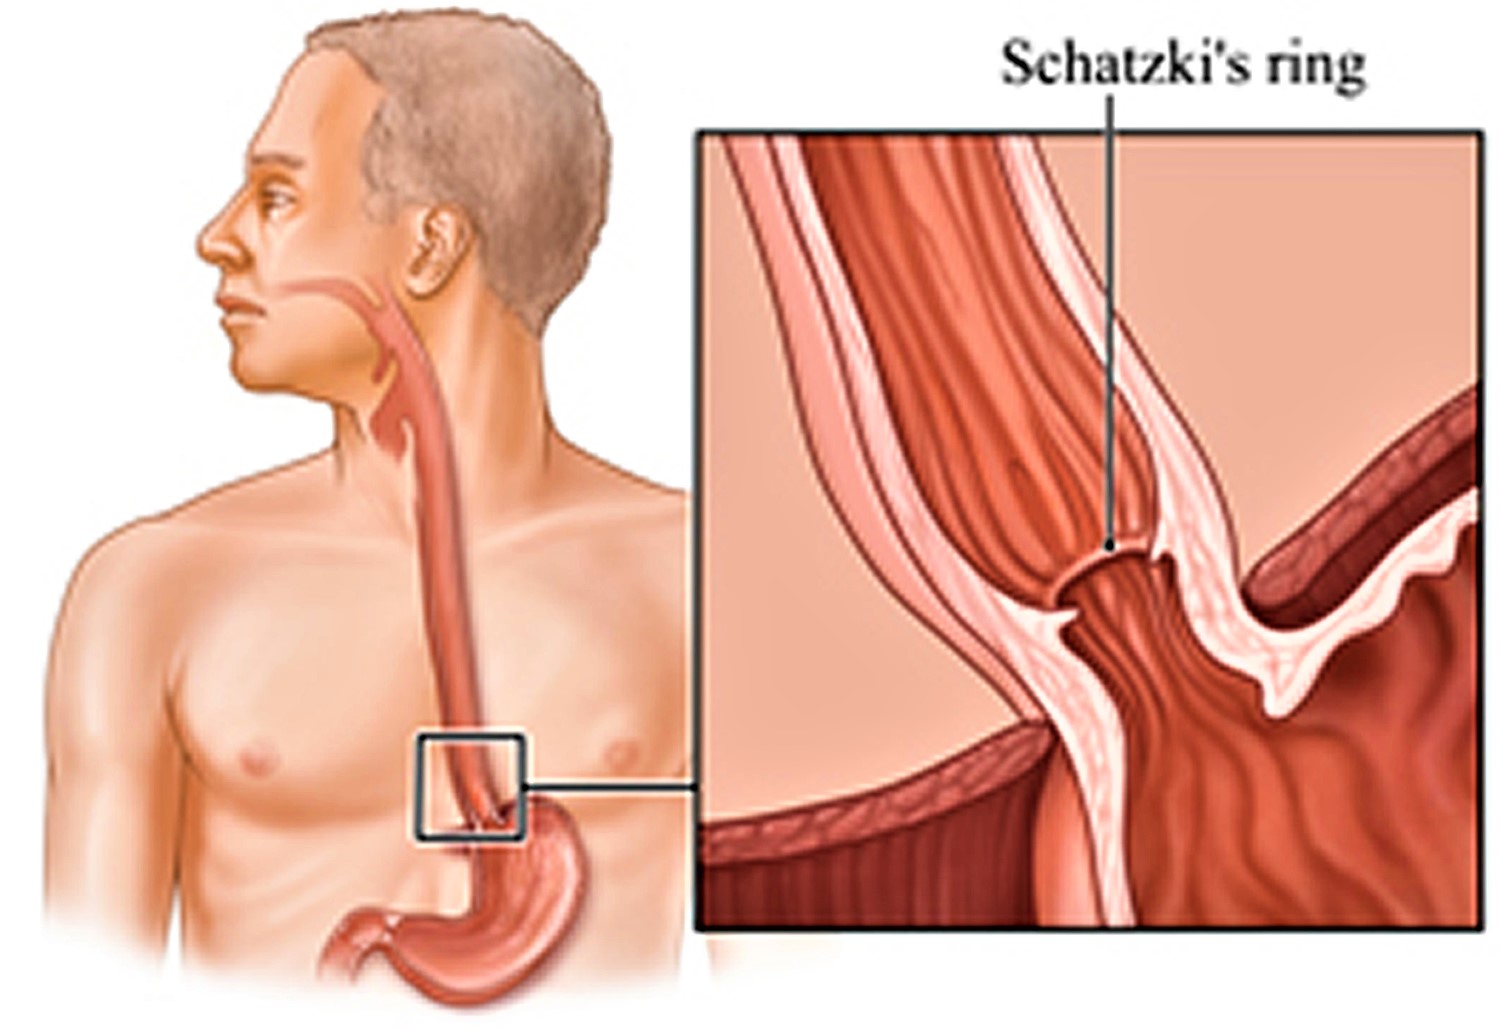 Esophageal Cancer - Causes, Signs, Symptoms, Treatment